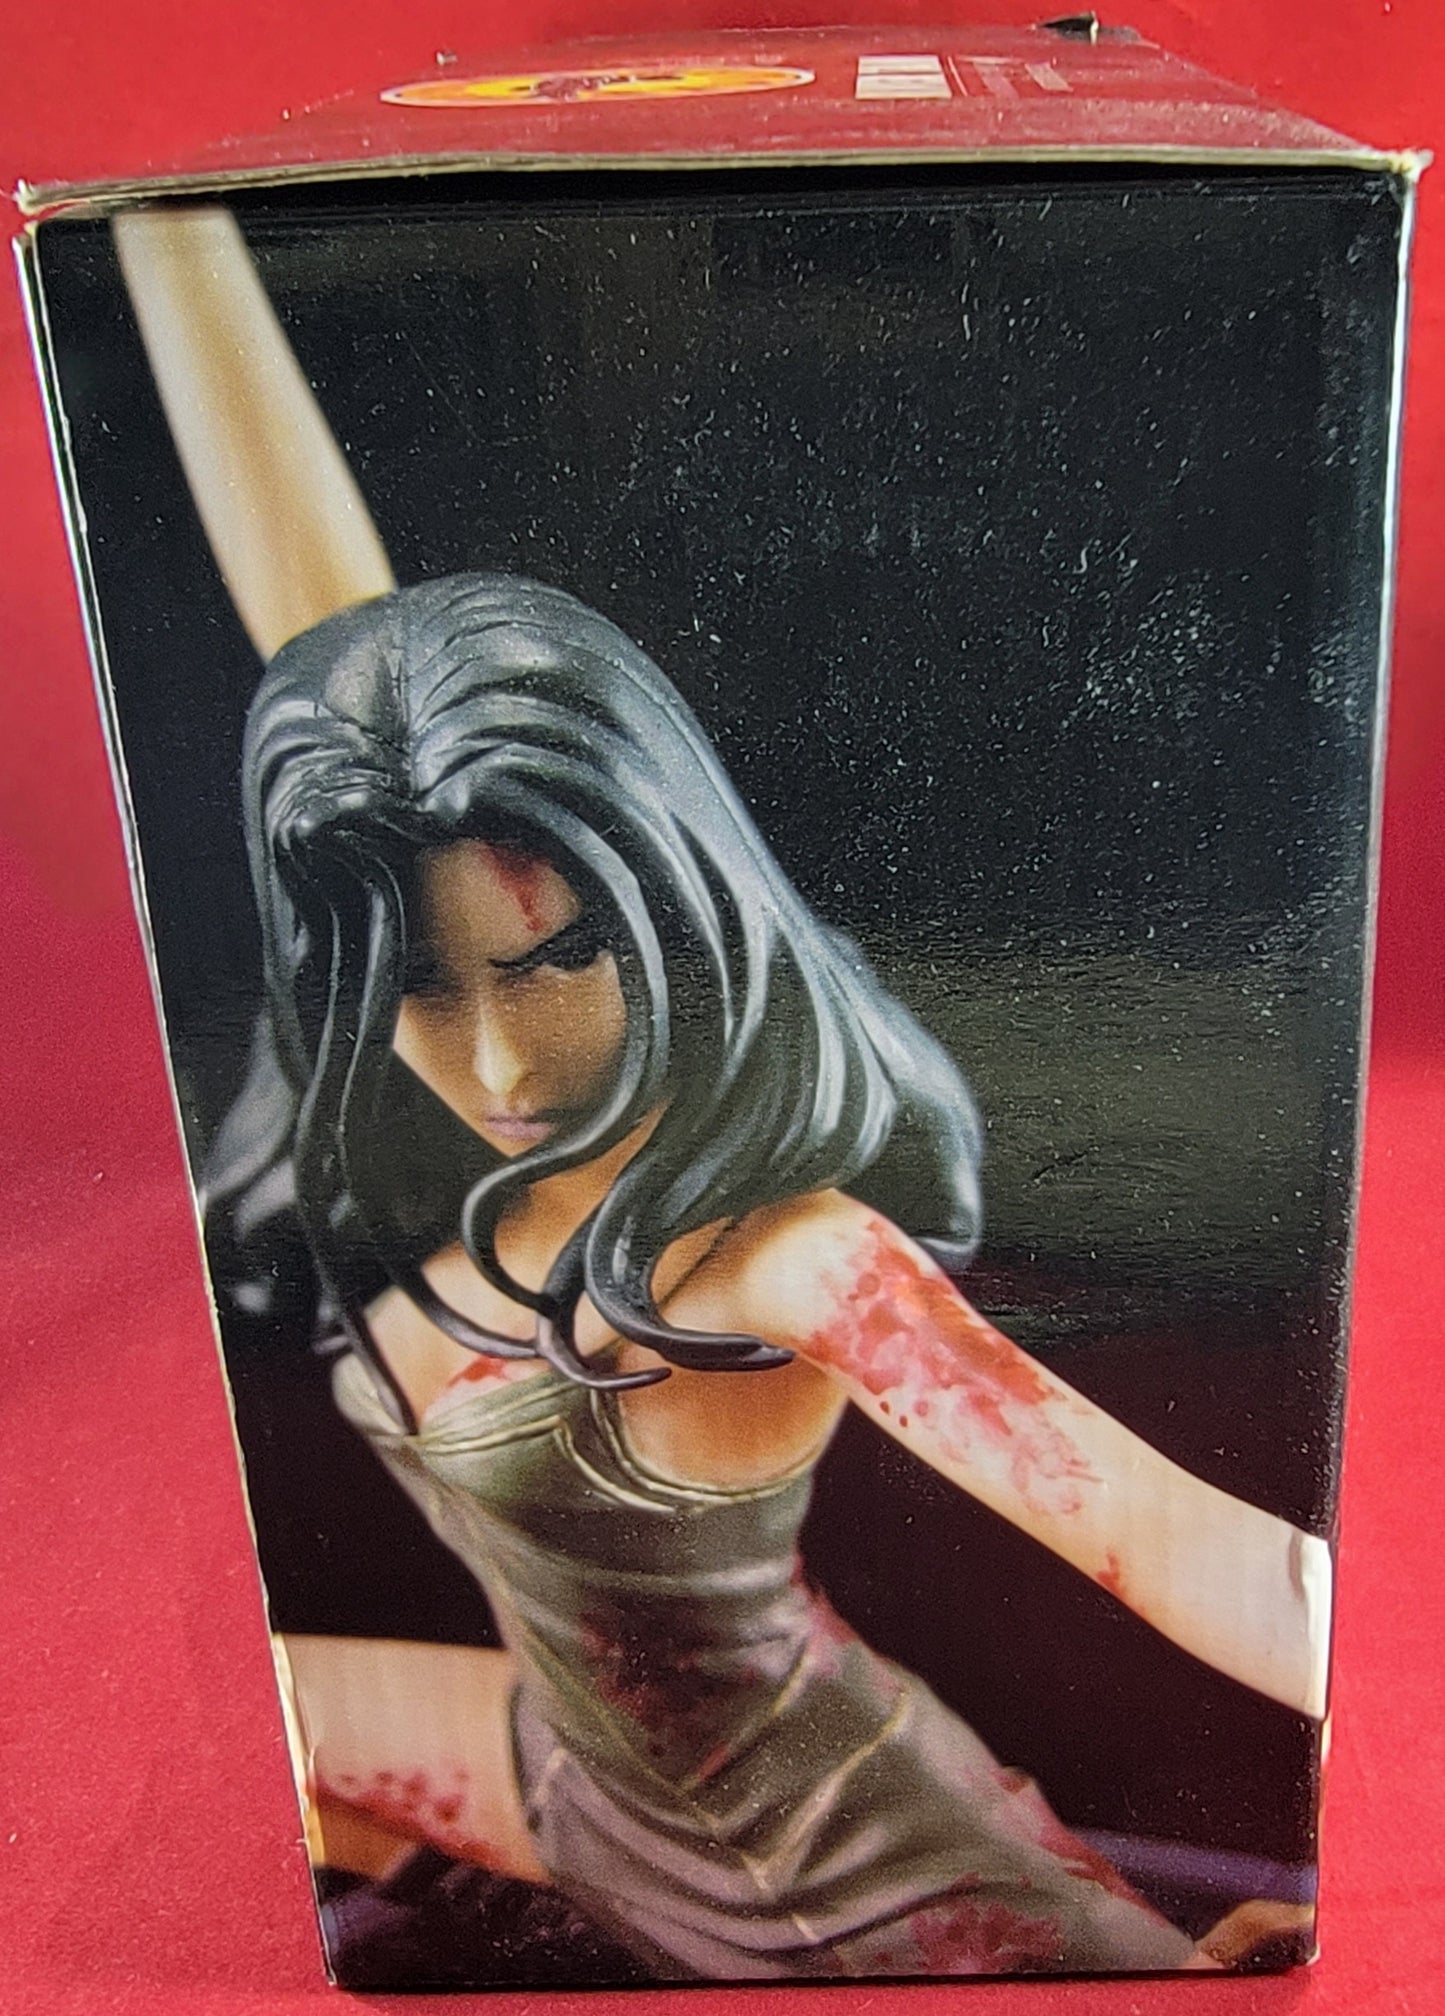 Brand new river Tam statue (nib)
big Damm heroes river tam hand-painted resin Maquette by Mohammad f Hague 0695 / 1500. statue base 7×4 inches with statue overall height almost 6 inches.